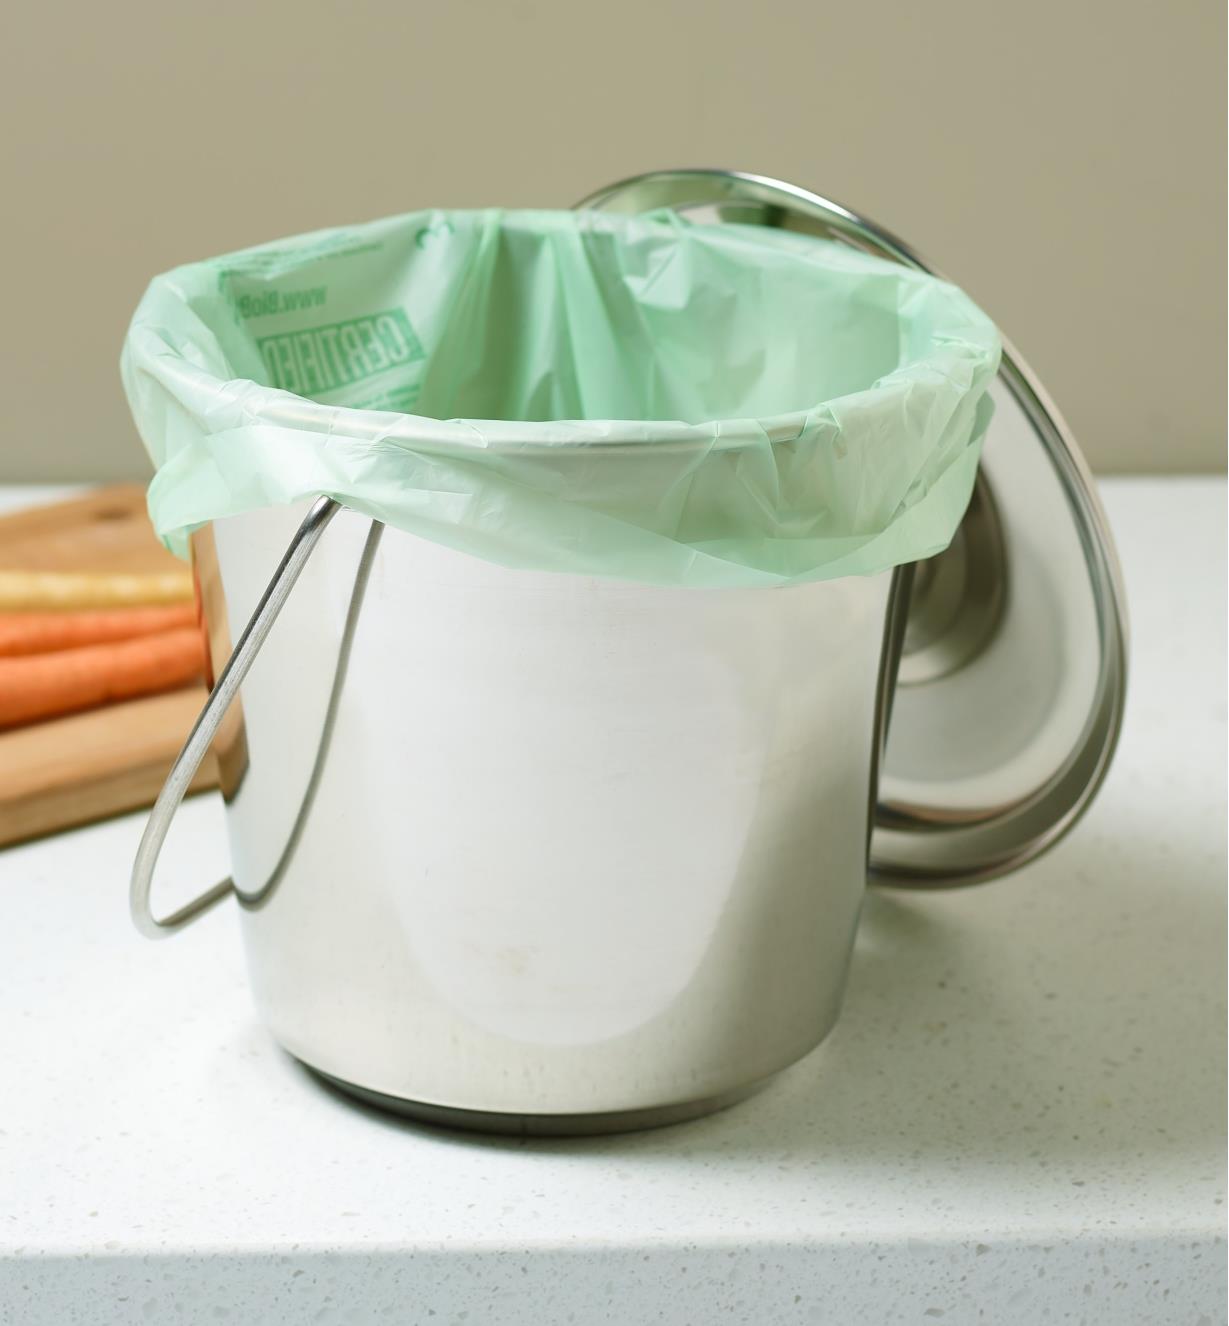 https://assets.leevalley.com/Size4/10118/XG150-stainless-steel-compost-pail-6-litres-u-0024.jpg